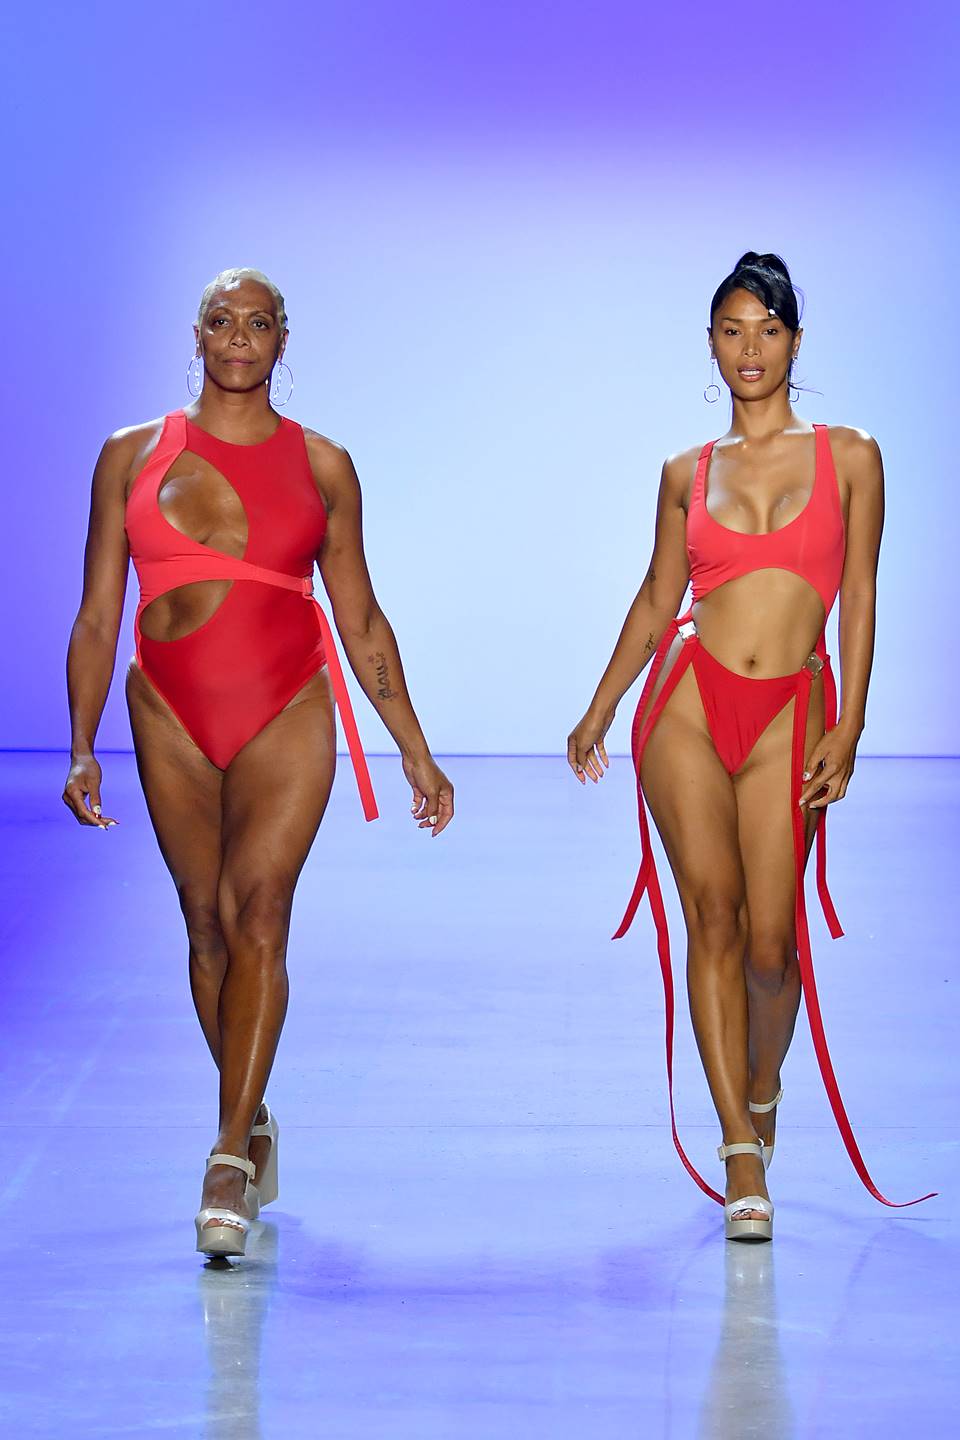 Mike Coppola/Getty Images for Chromat via Getty Images